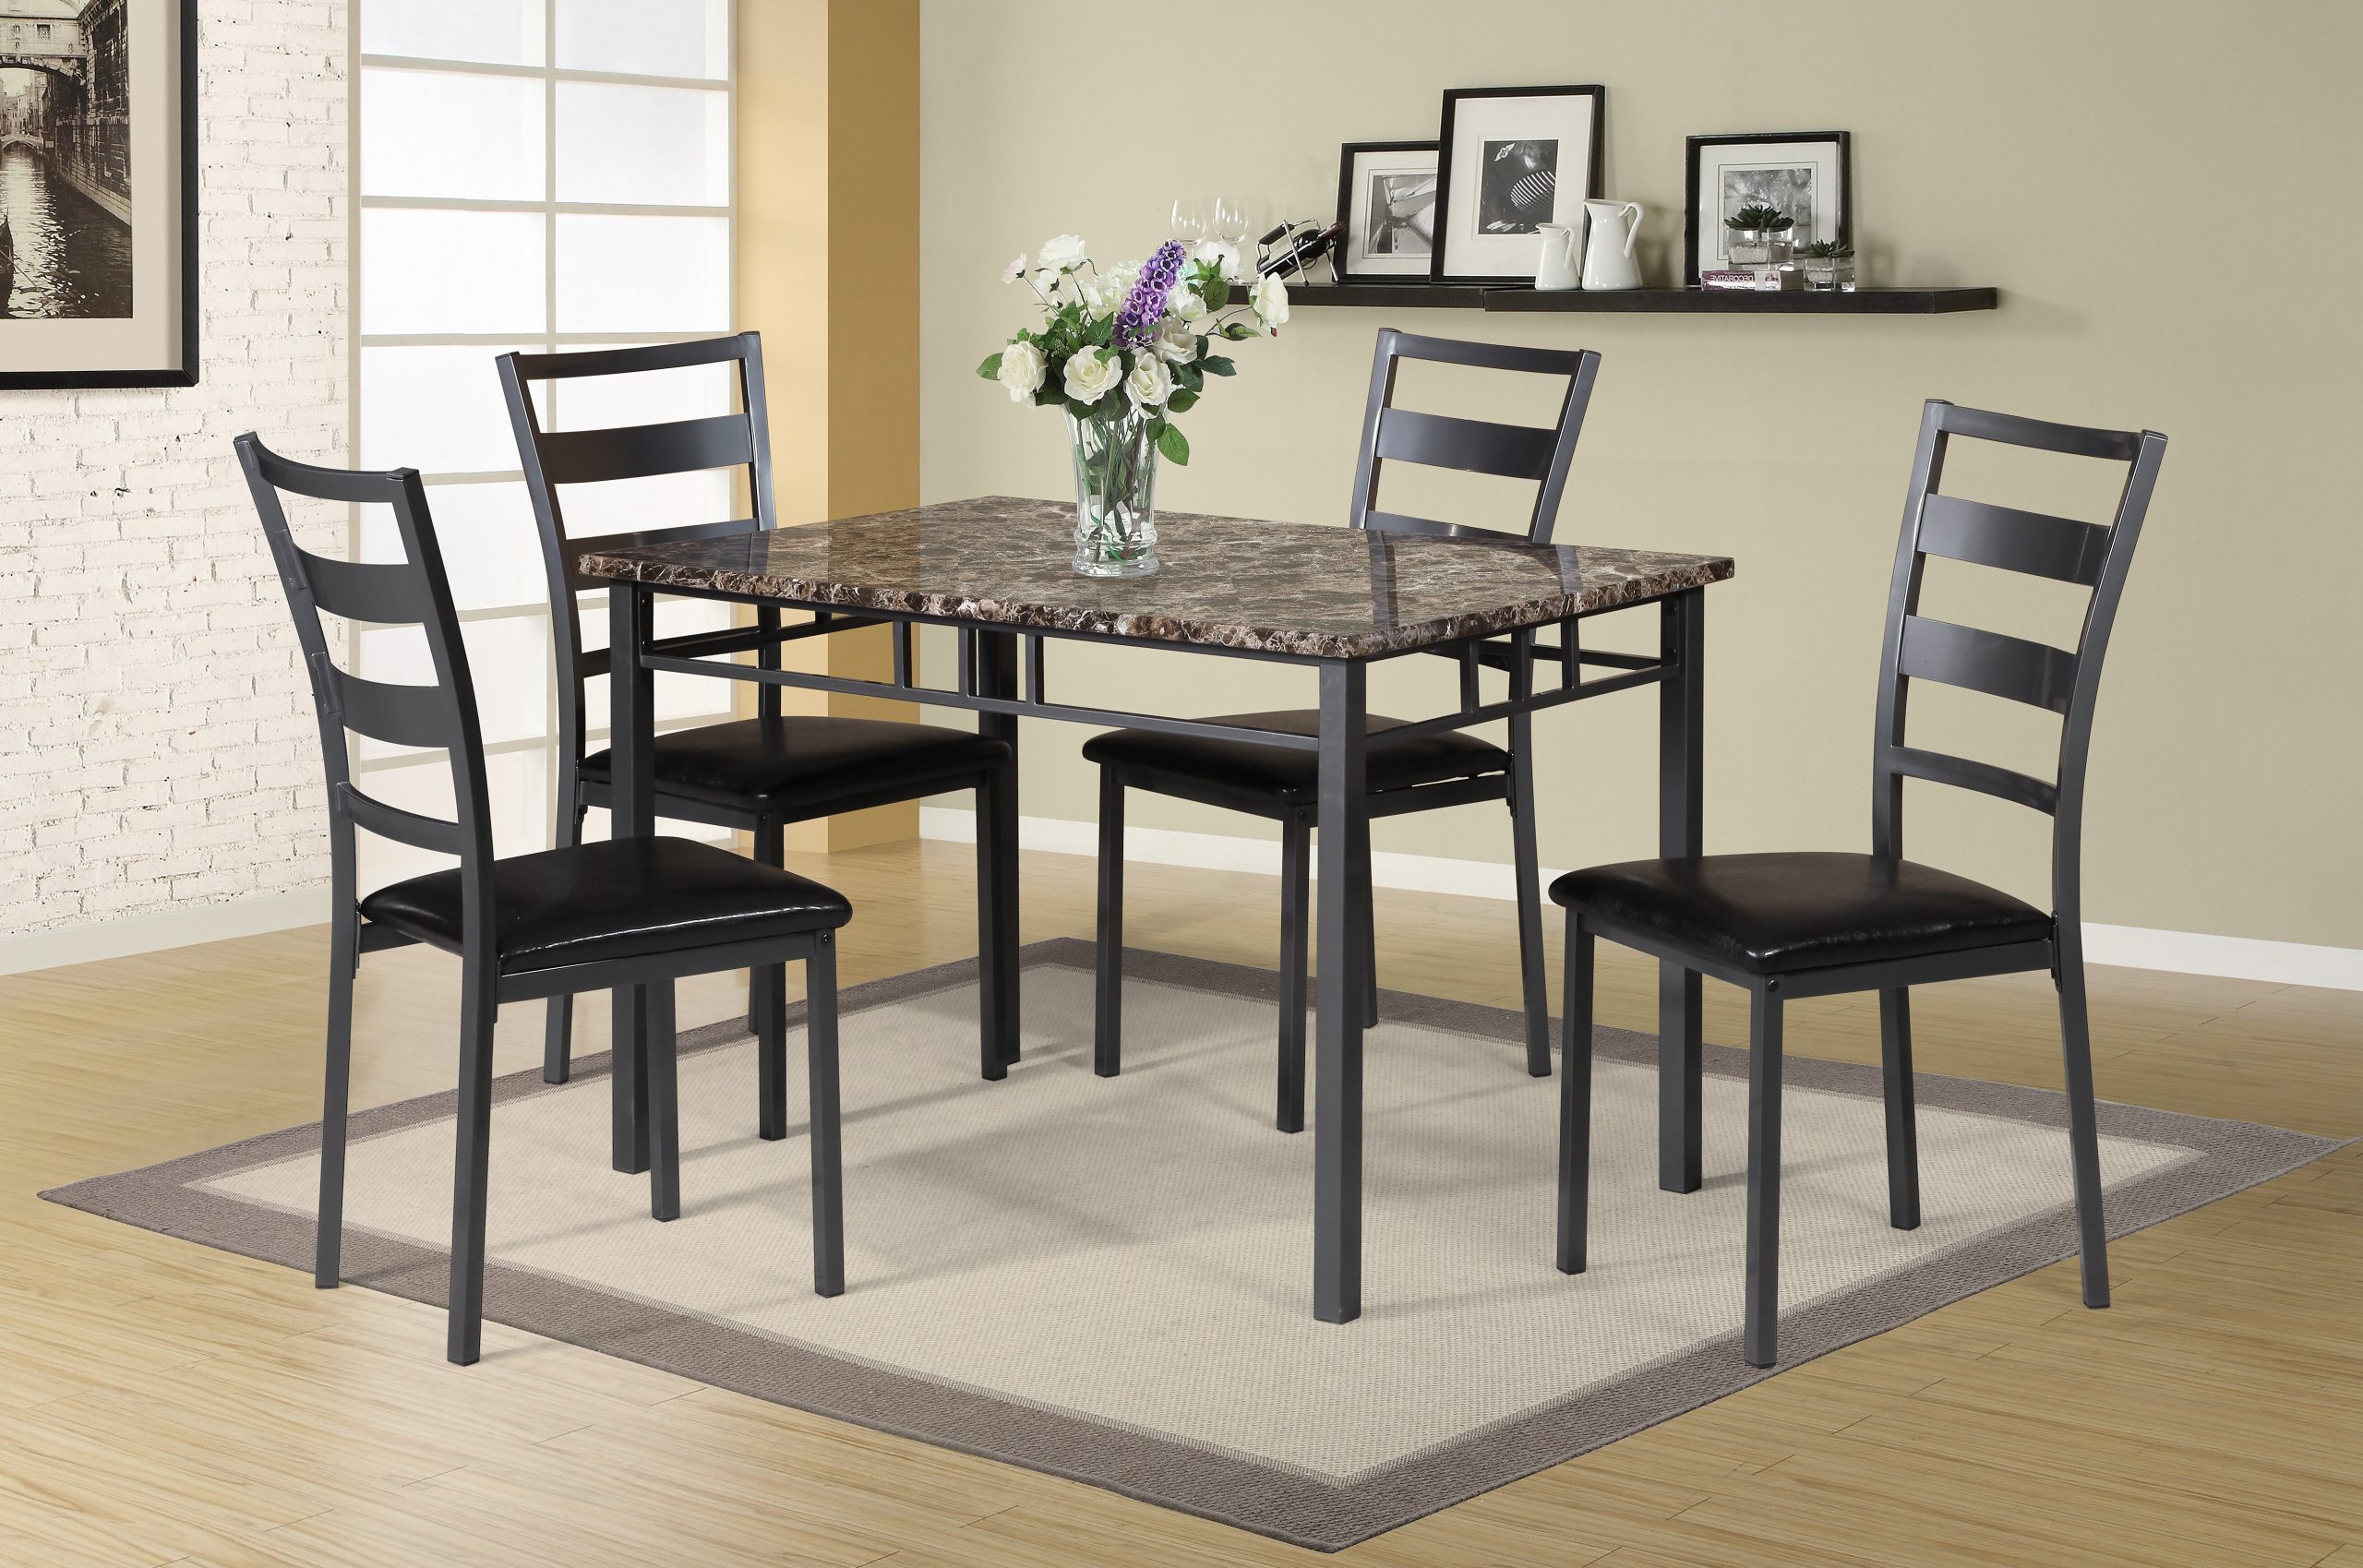 Mcchristian 5 Piece Dining Set throughout proportions 5223 X 3466